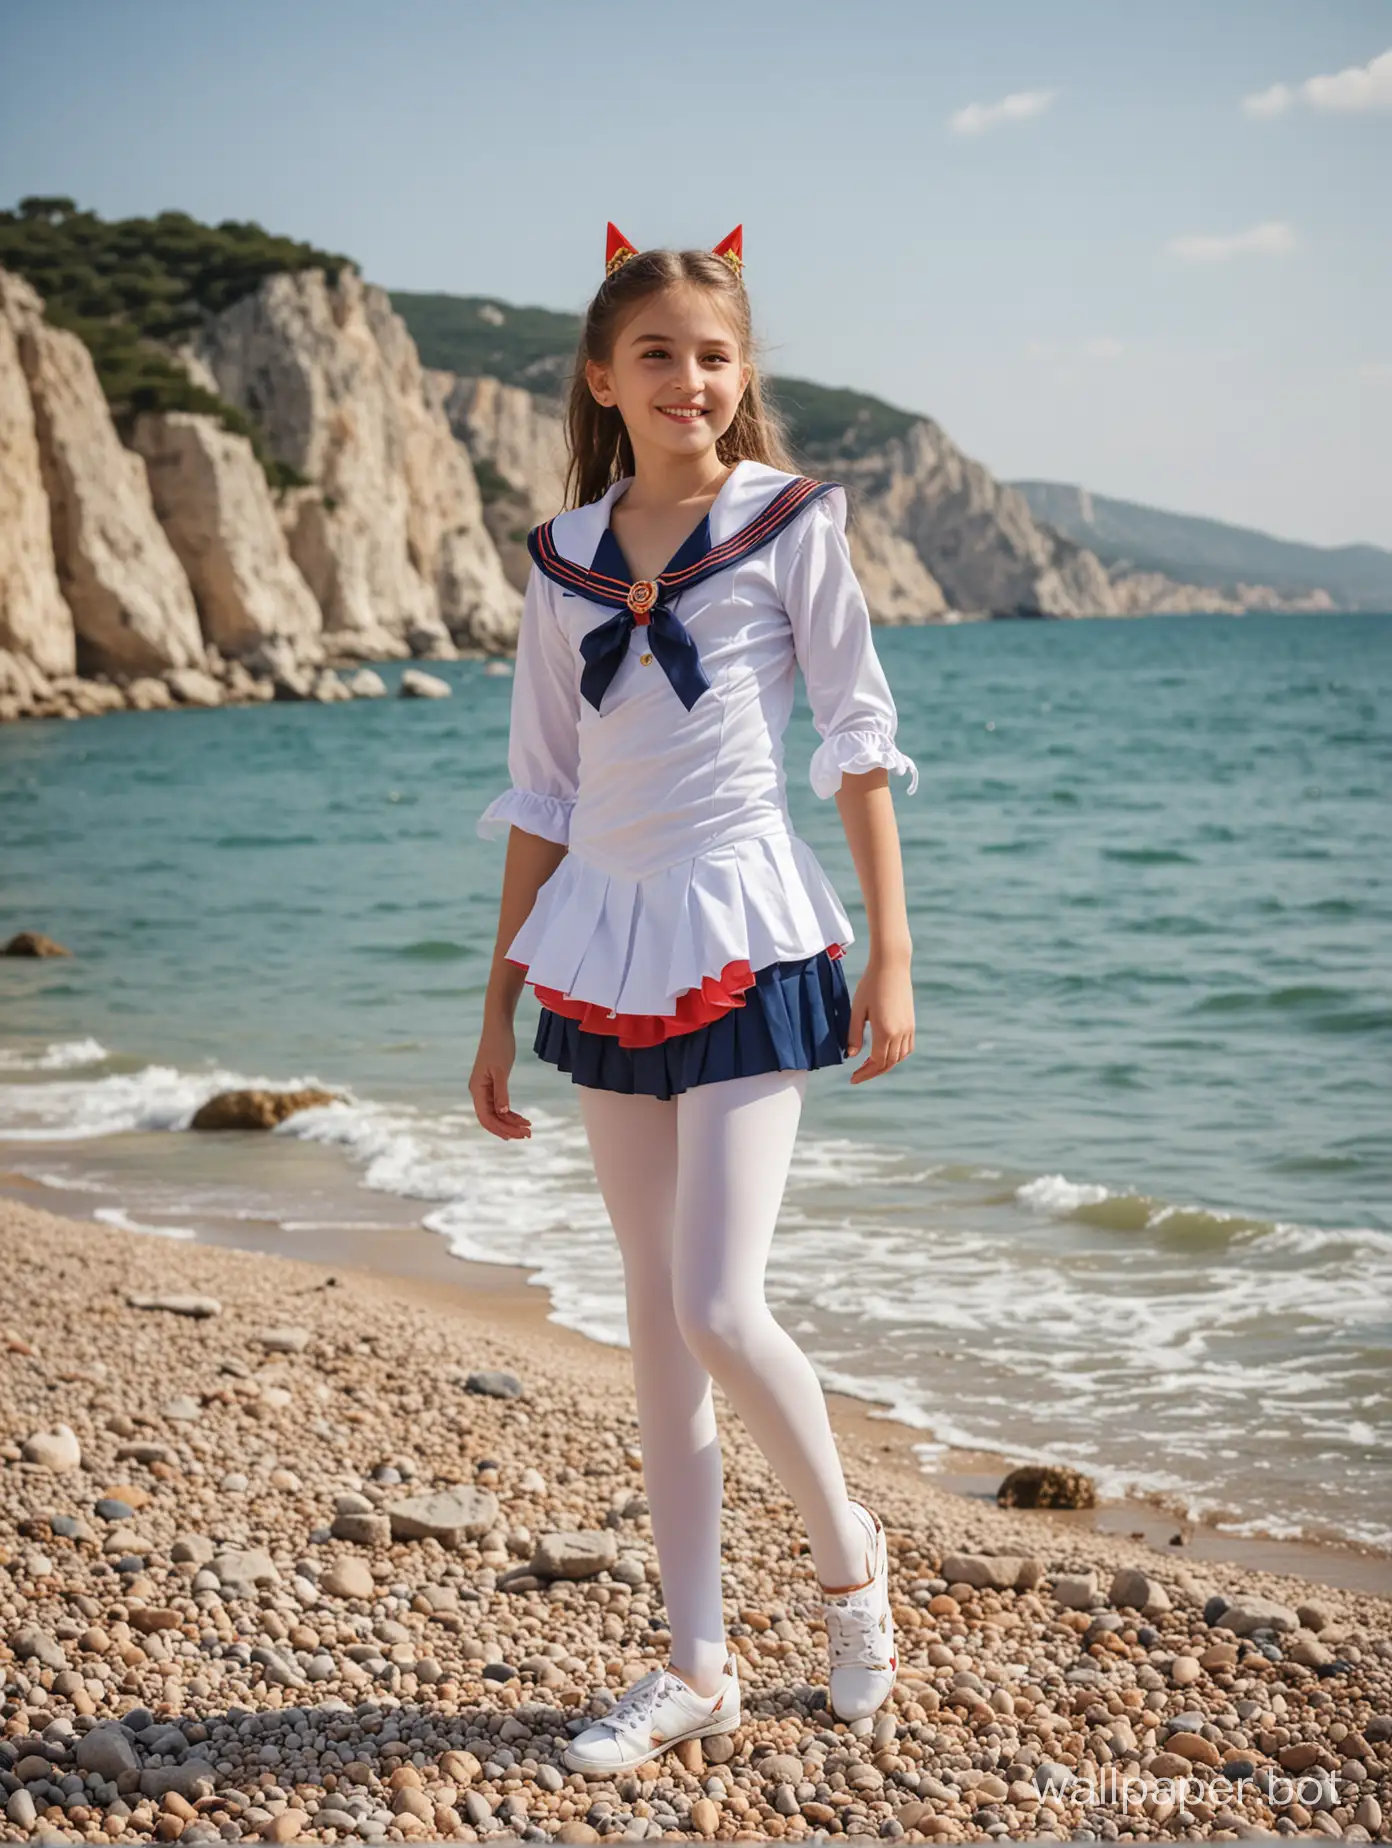 Beautiful girl 10 years old in Crimea by the sea in a Sailor Moon costume, full-length, children of different ages around, dynamic poses, posing, smiling